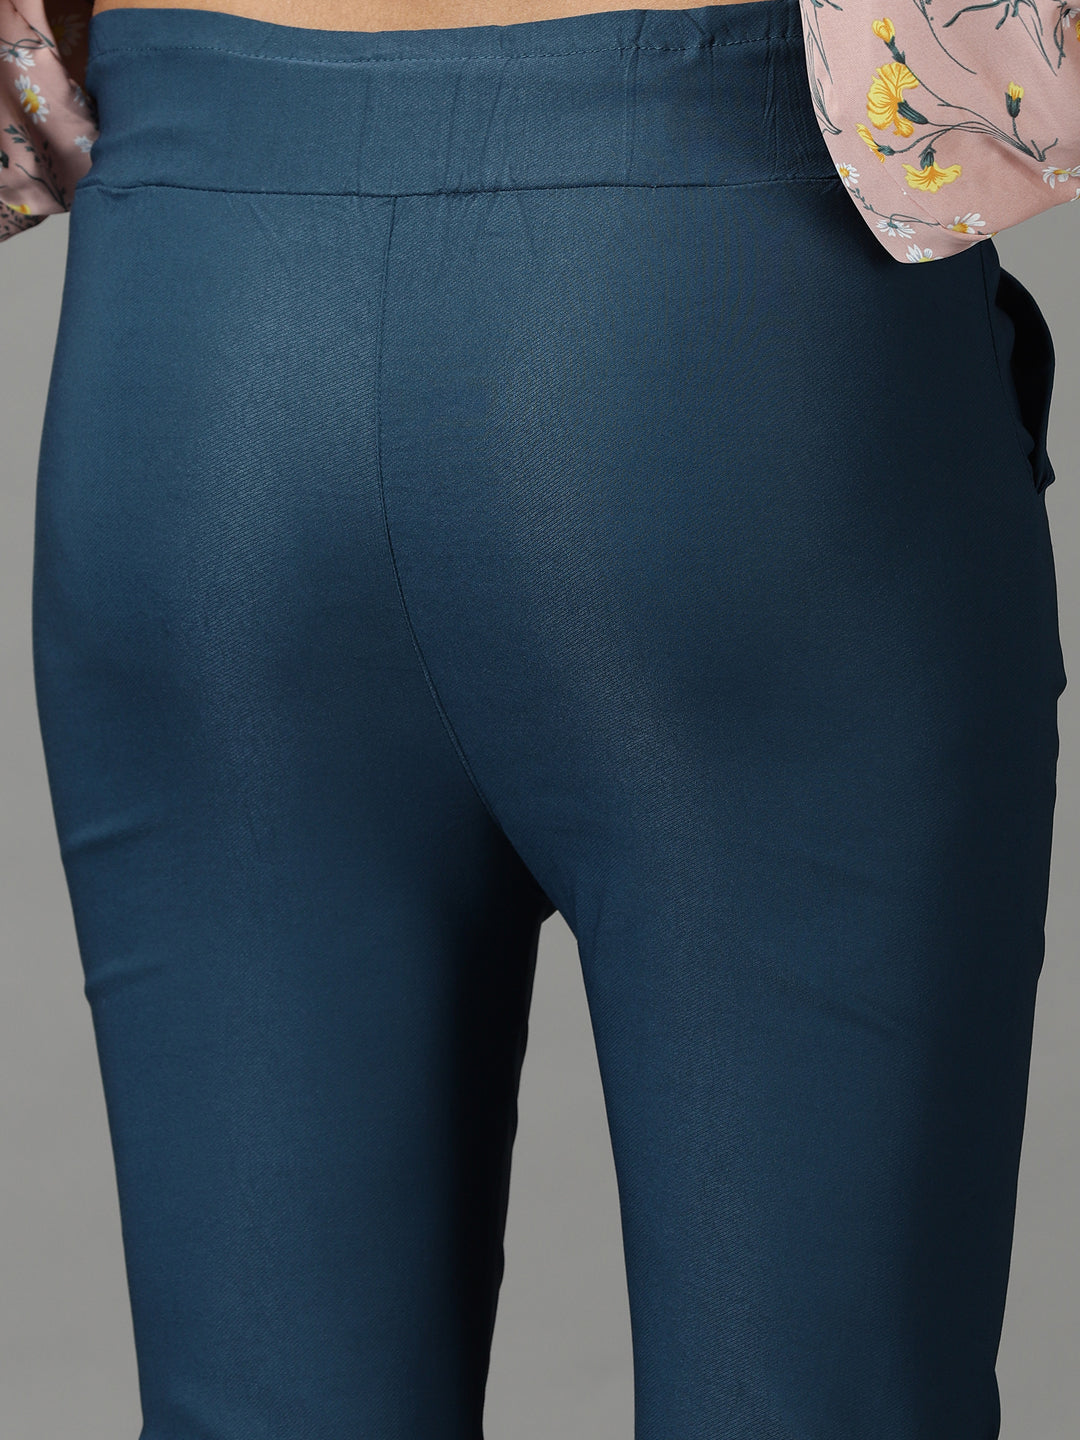 Women's Teal Solid Trouser